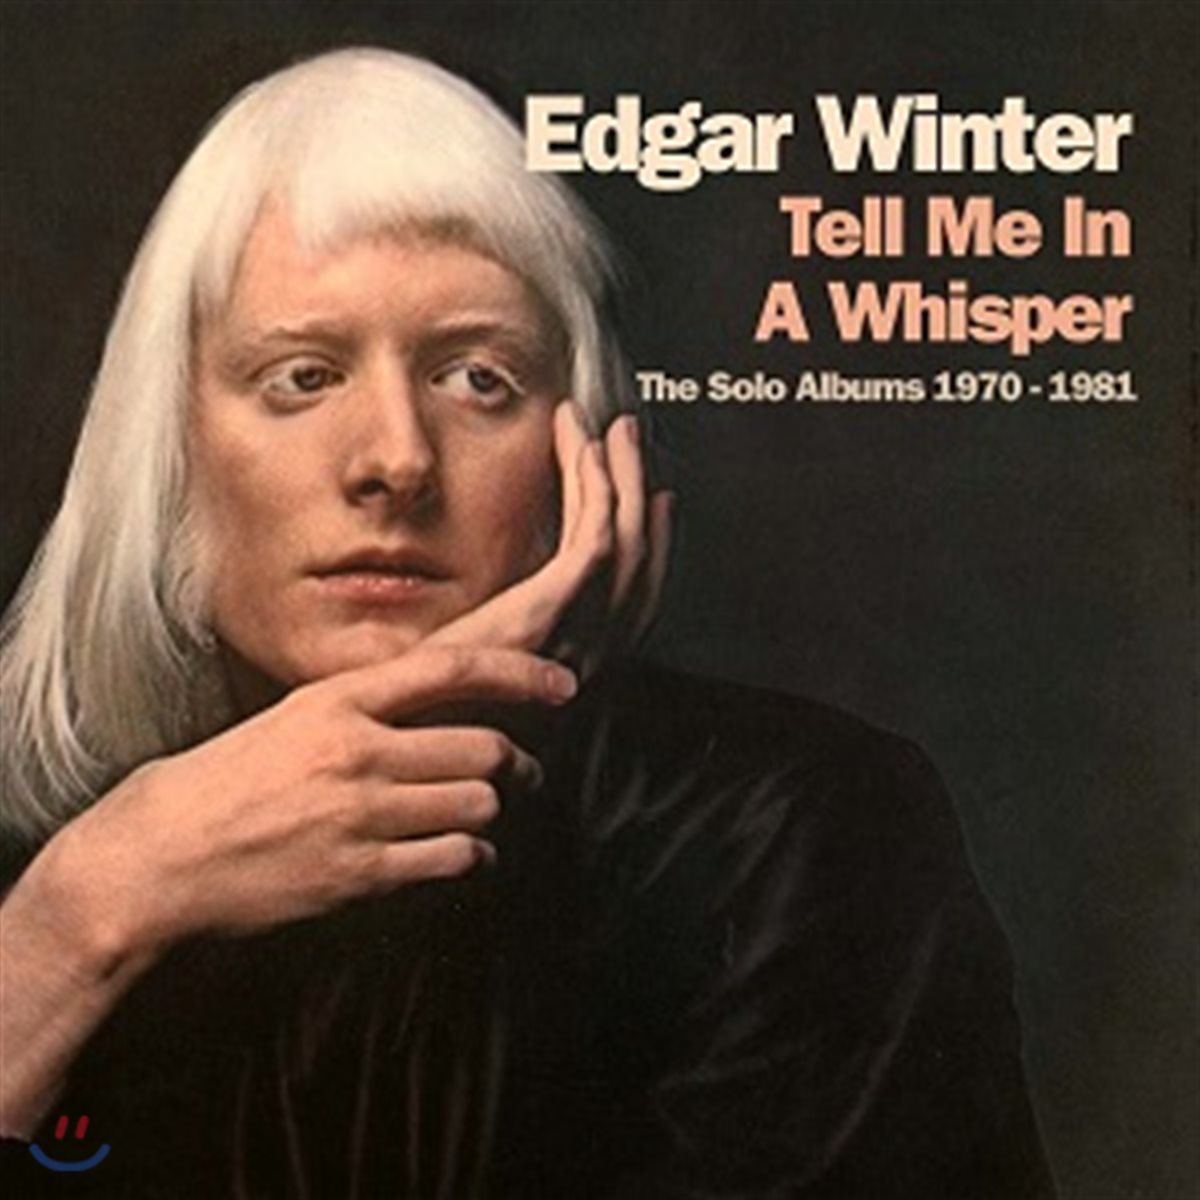 Edgar Winter (에드가 윈터) - Tell Me In A Whisper: The Solo Albums 1970-1981